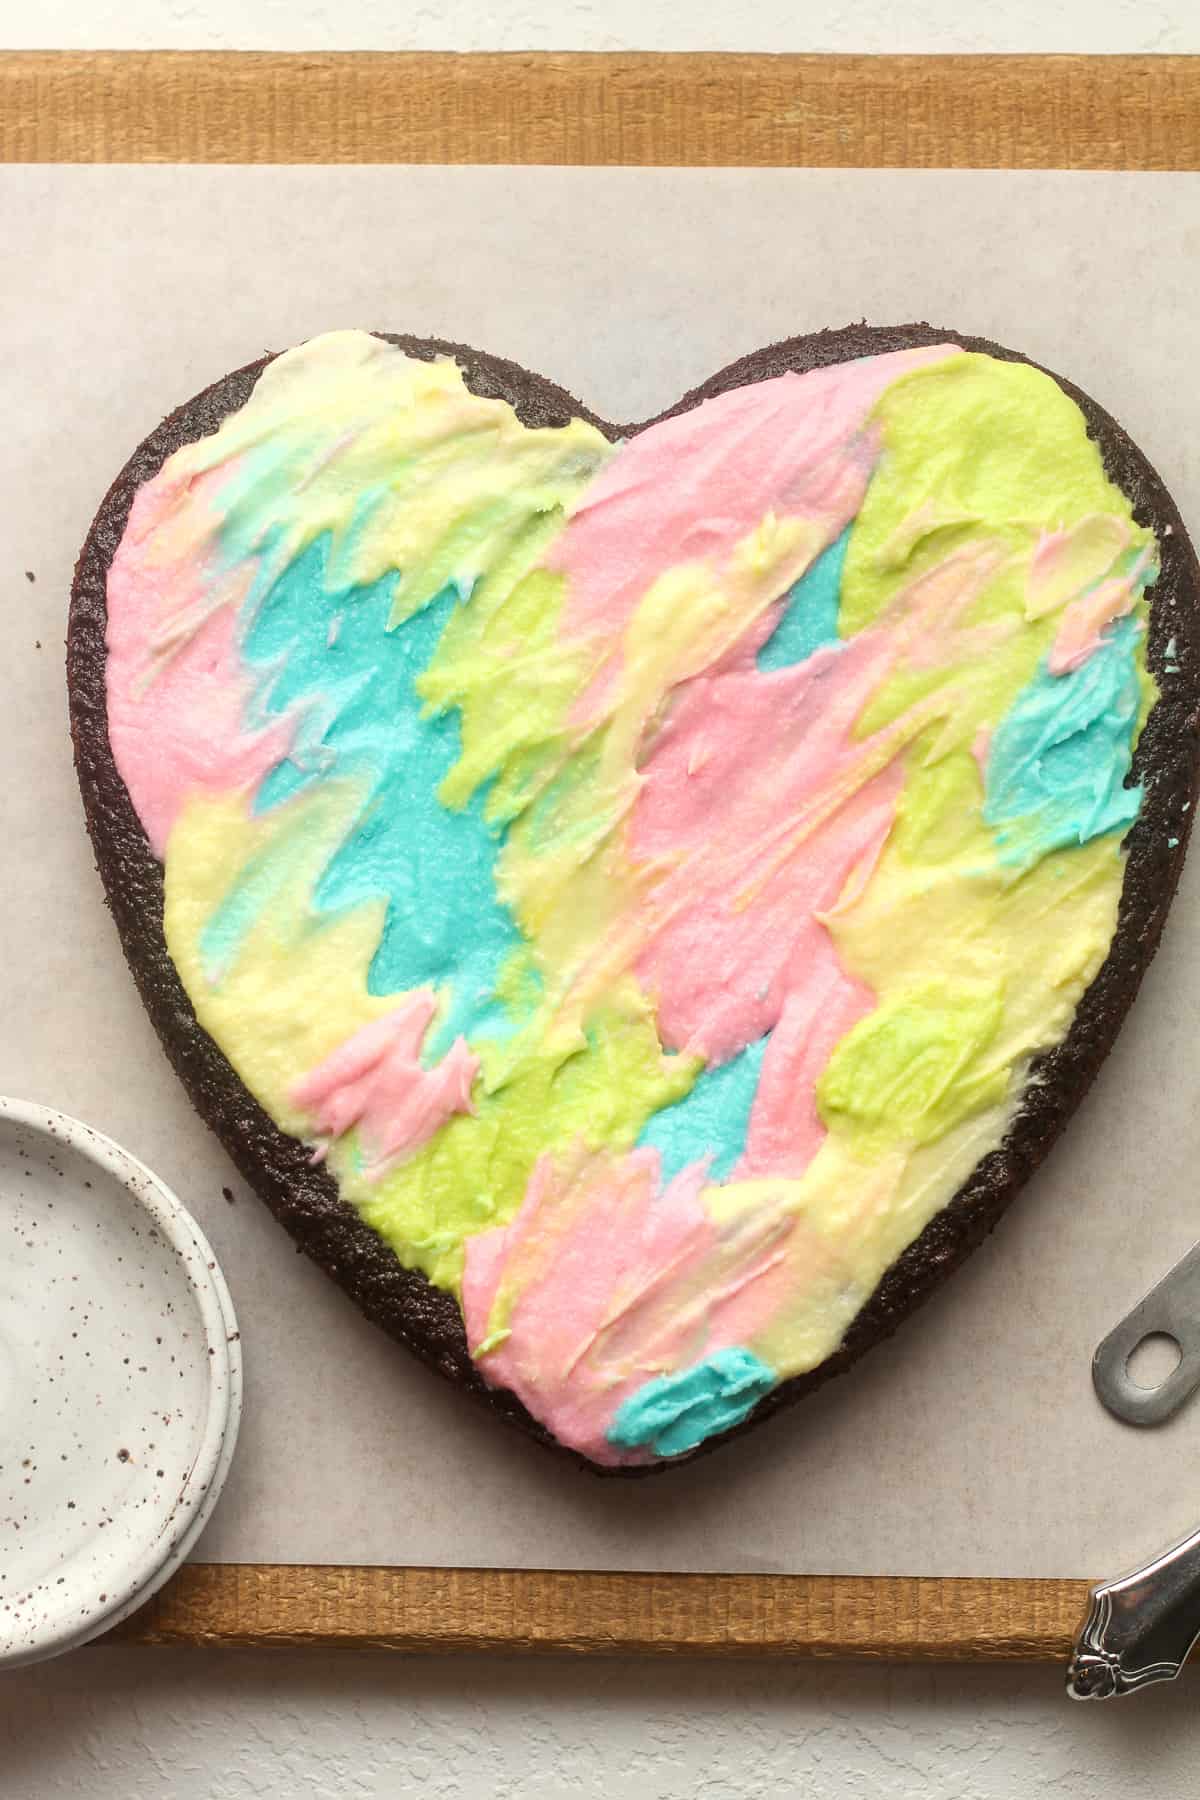 A heart shaped cake with colorful buttercream frosting.